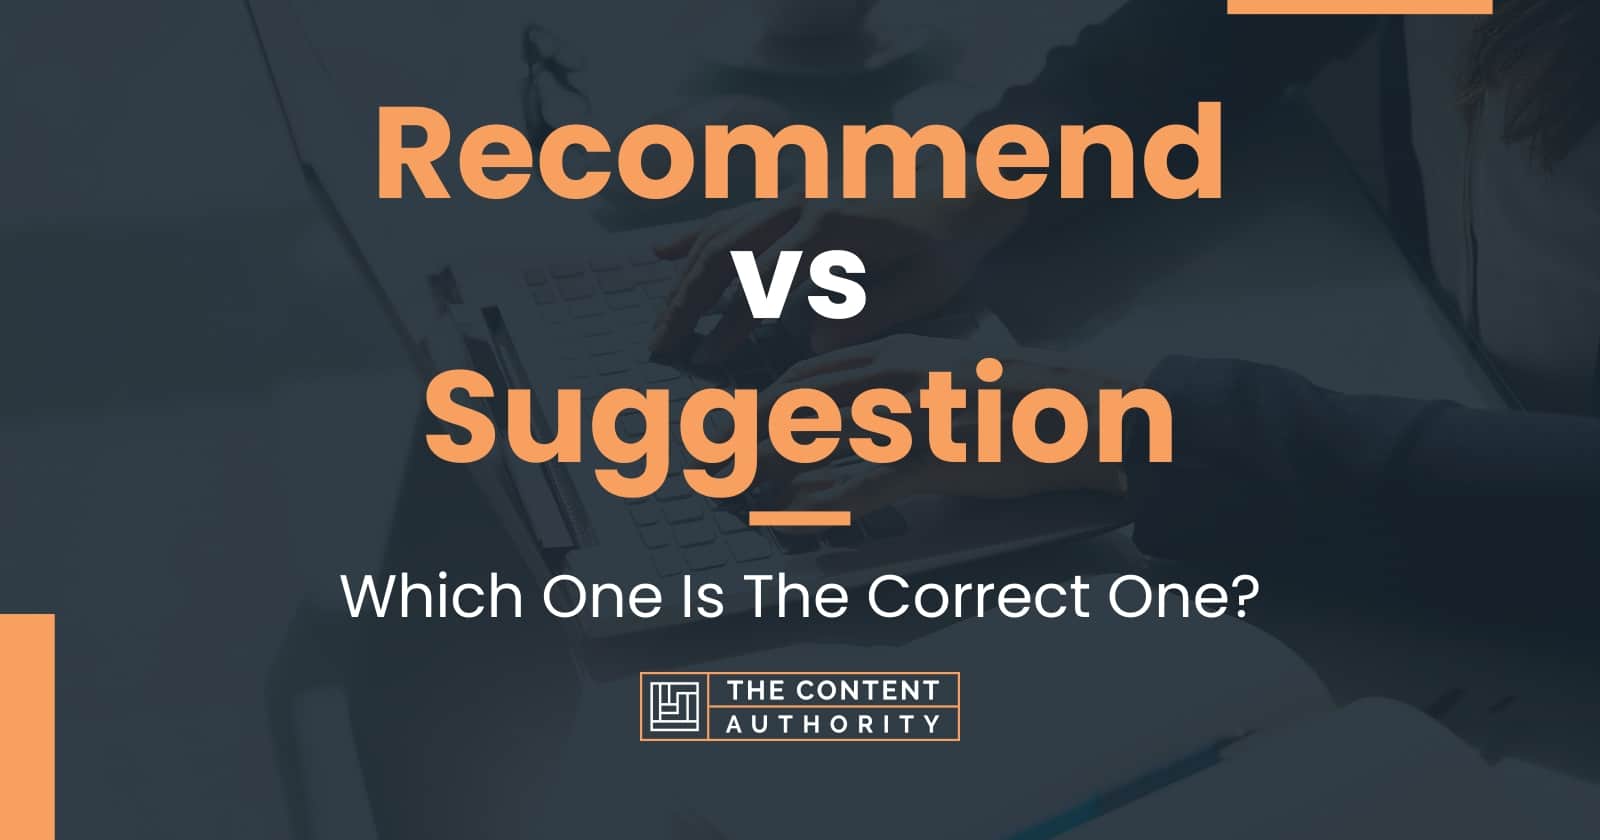 Recommend vs Suggestion: Which One Is The Correct One?